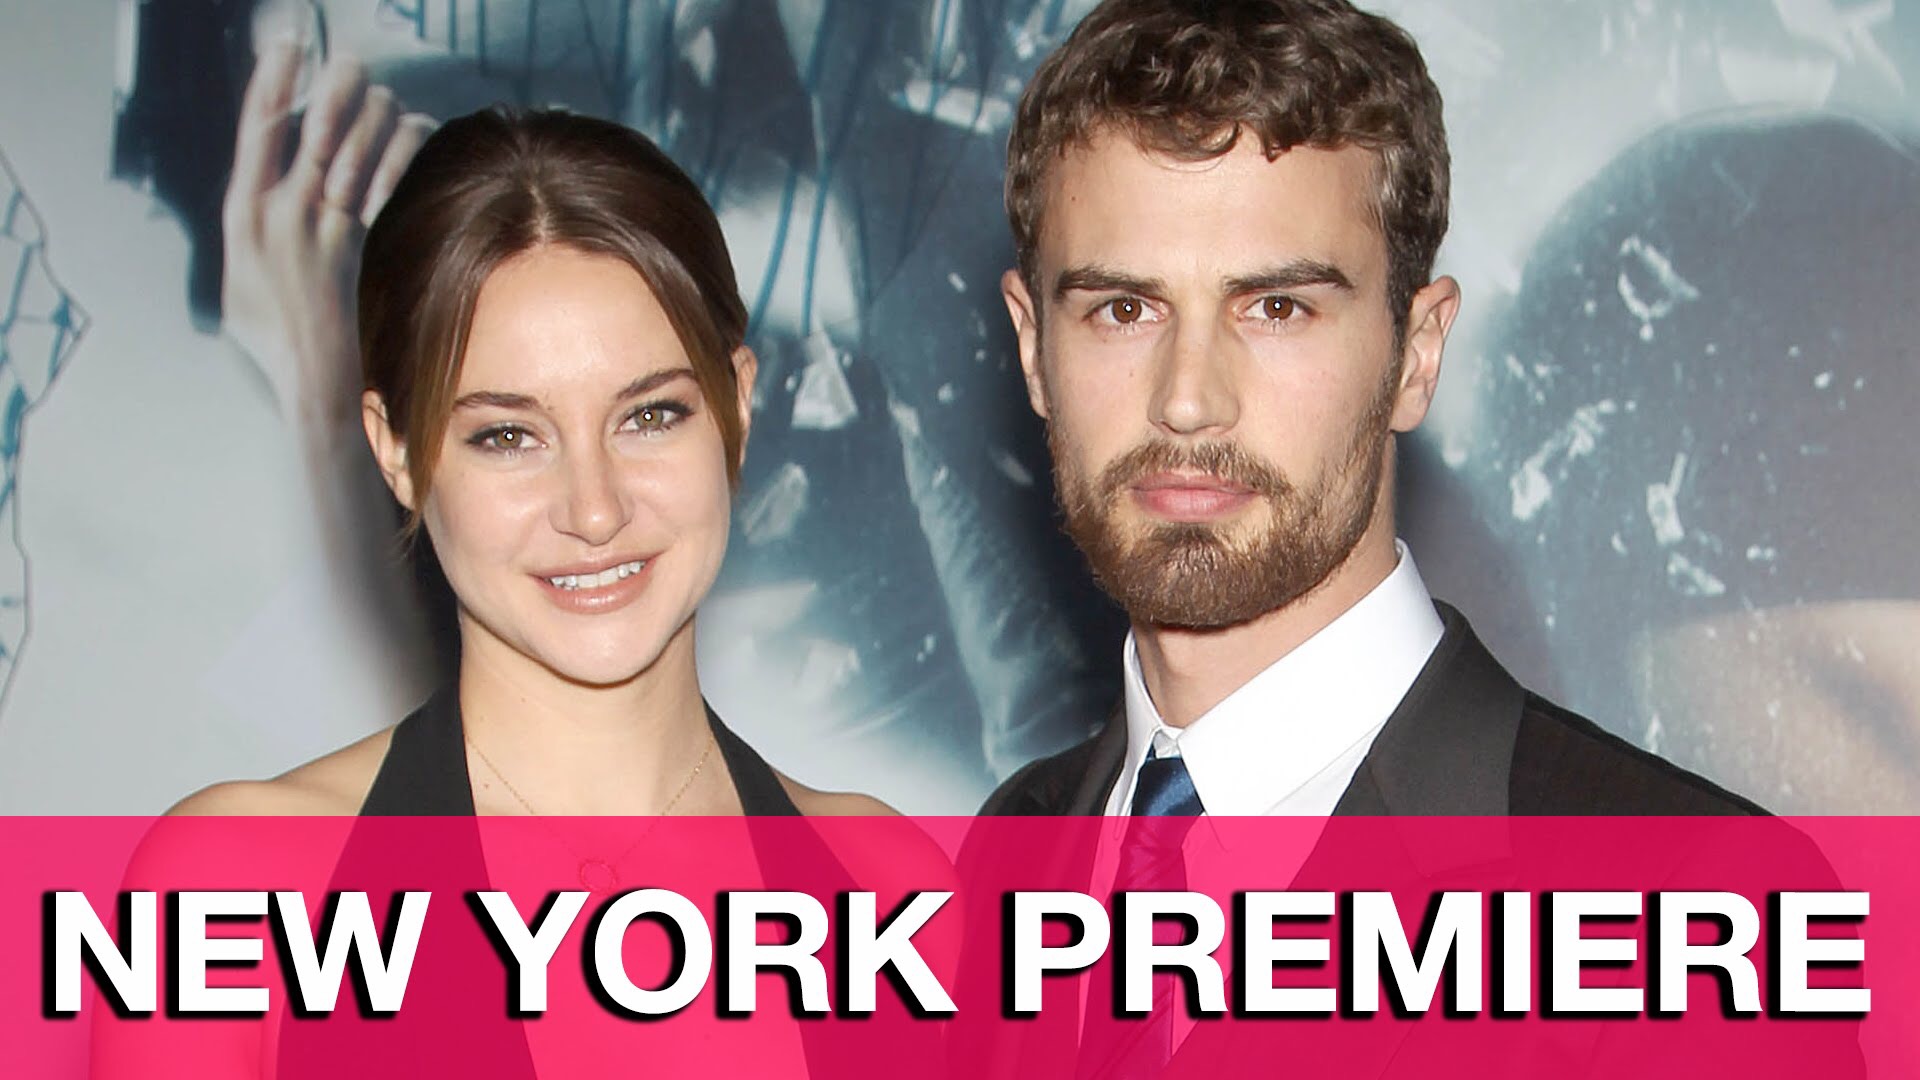 Watch: Insurgent Cast on the NYC Premiere Red Carpet